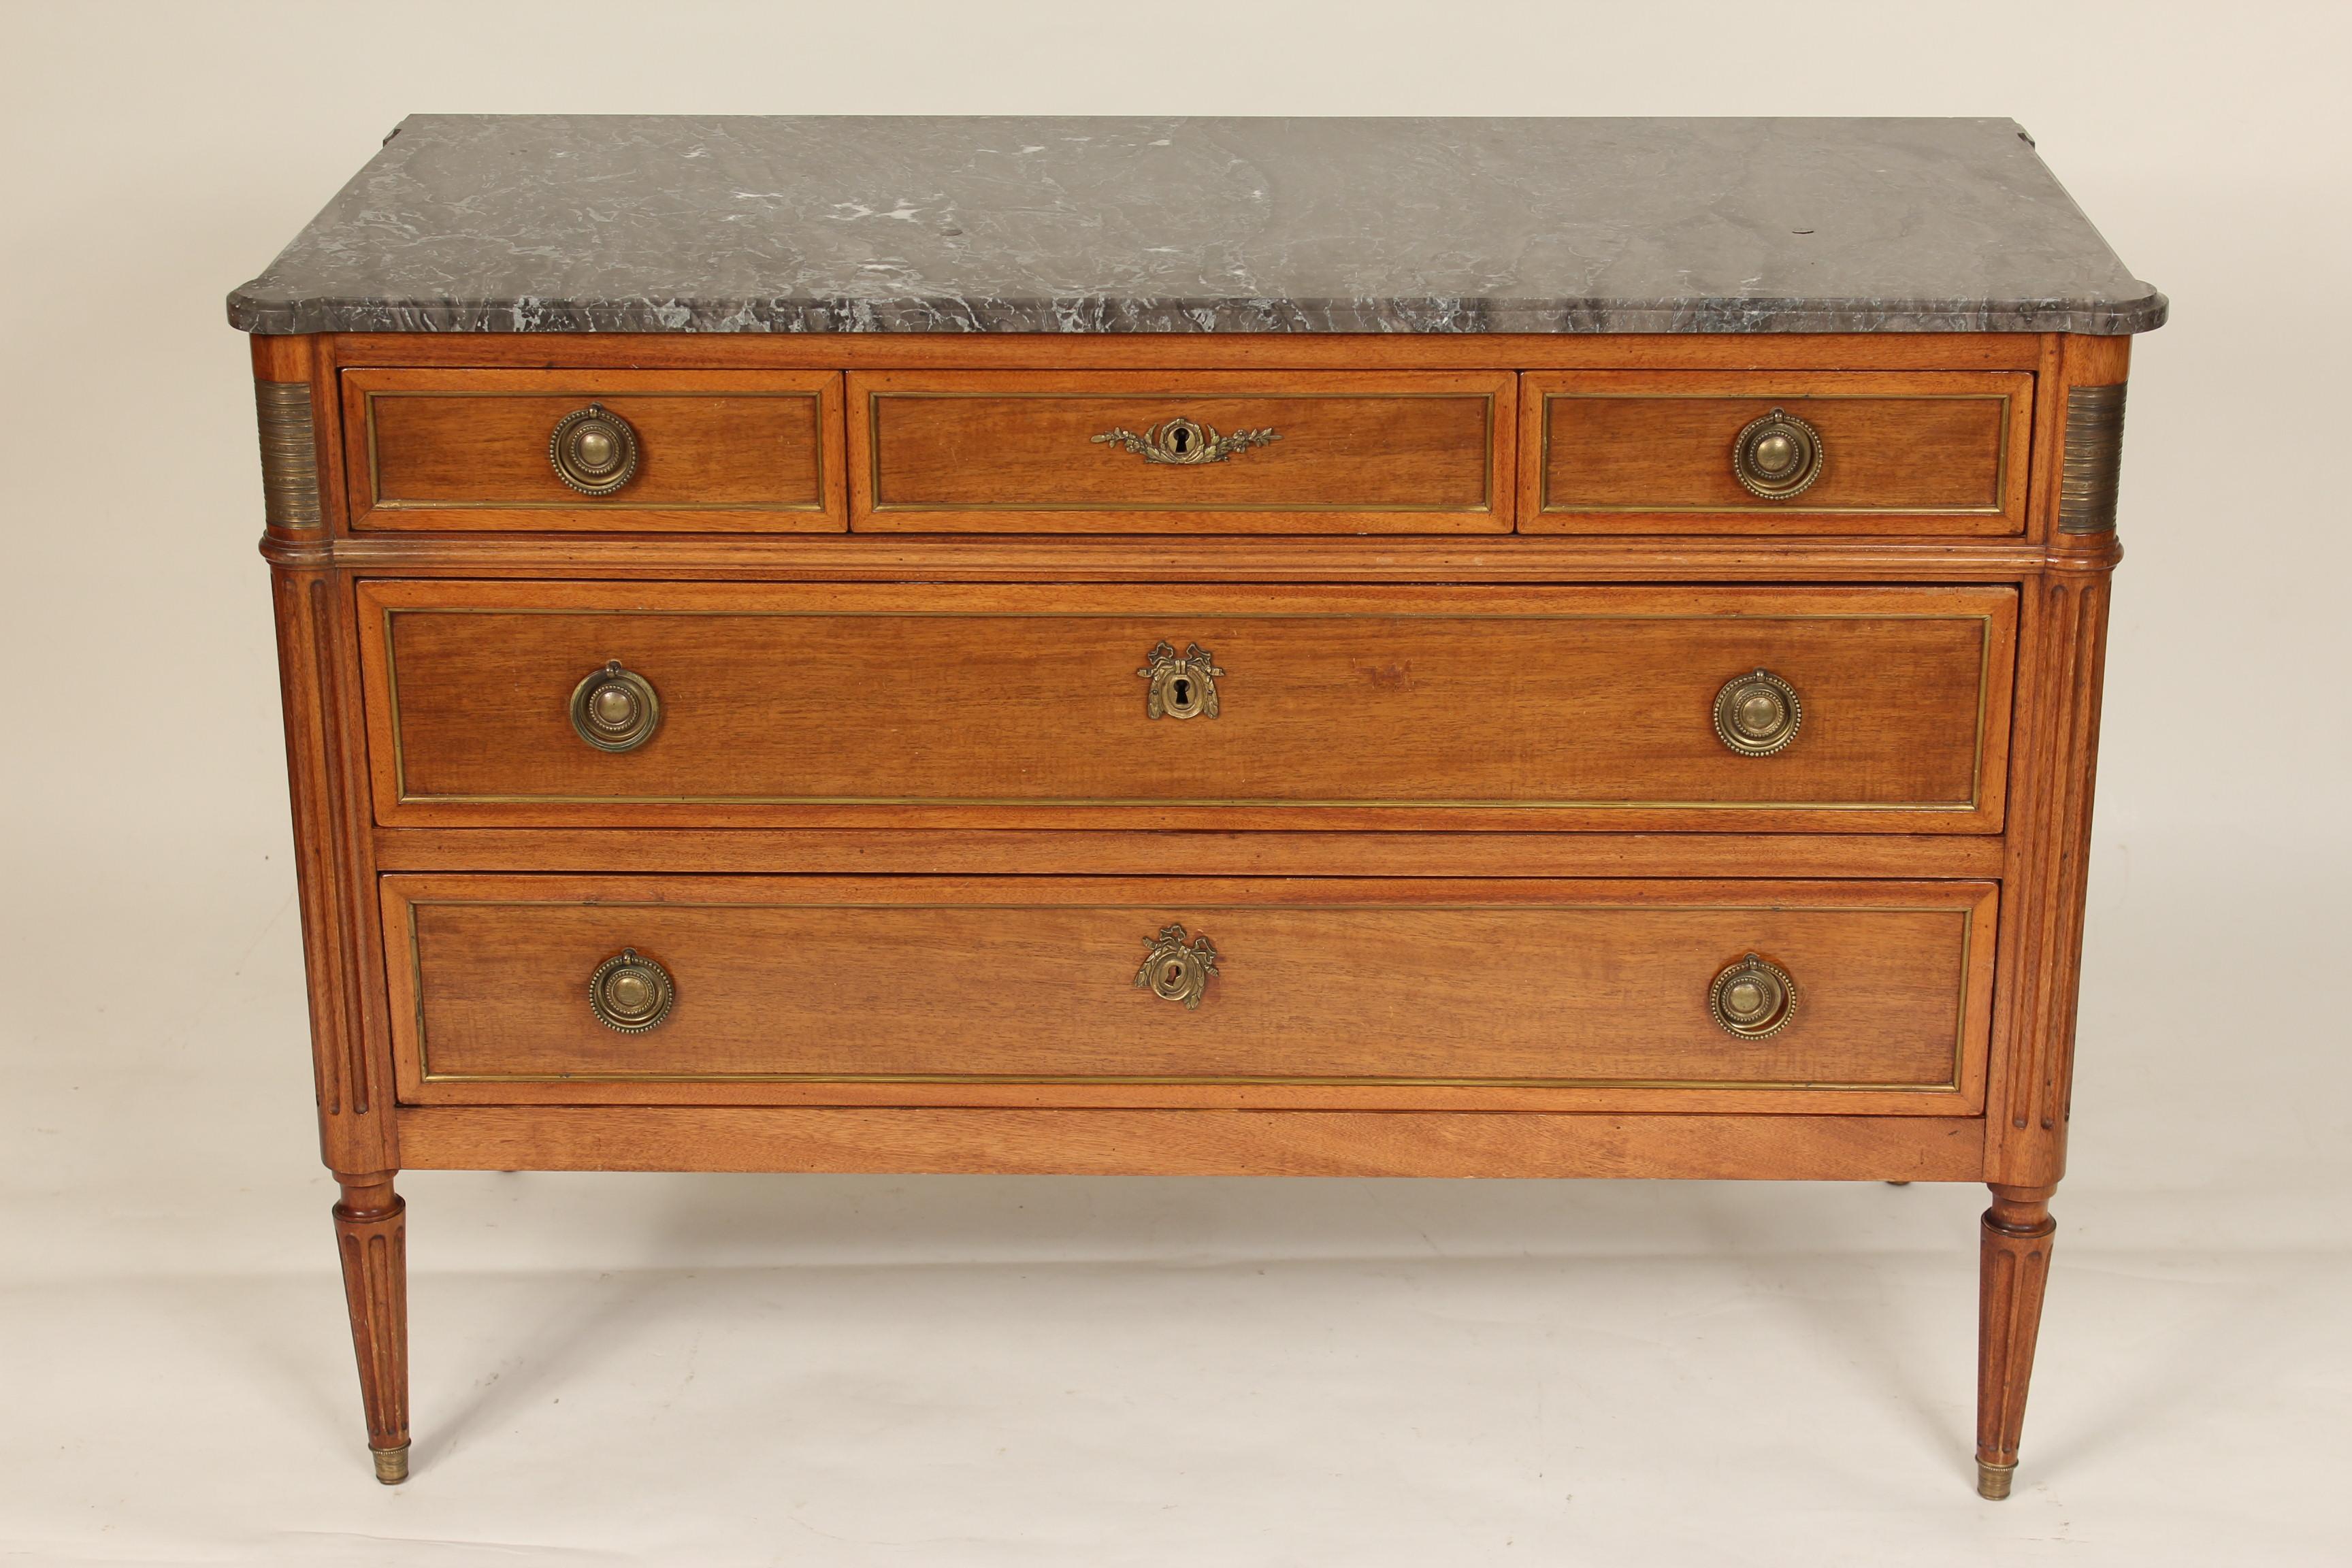 Antique Louis XVI style mahogany chest of drawers with brass moldings, mounts and a hand cut marble top, late 19th century.